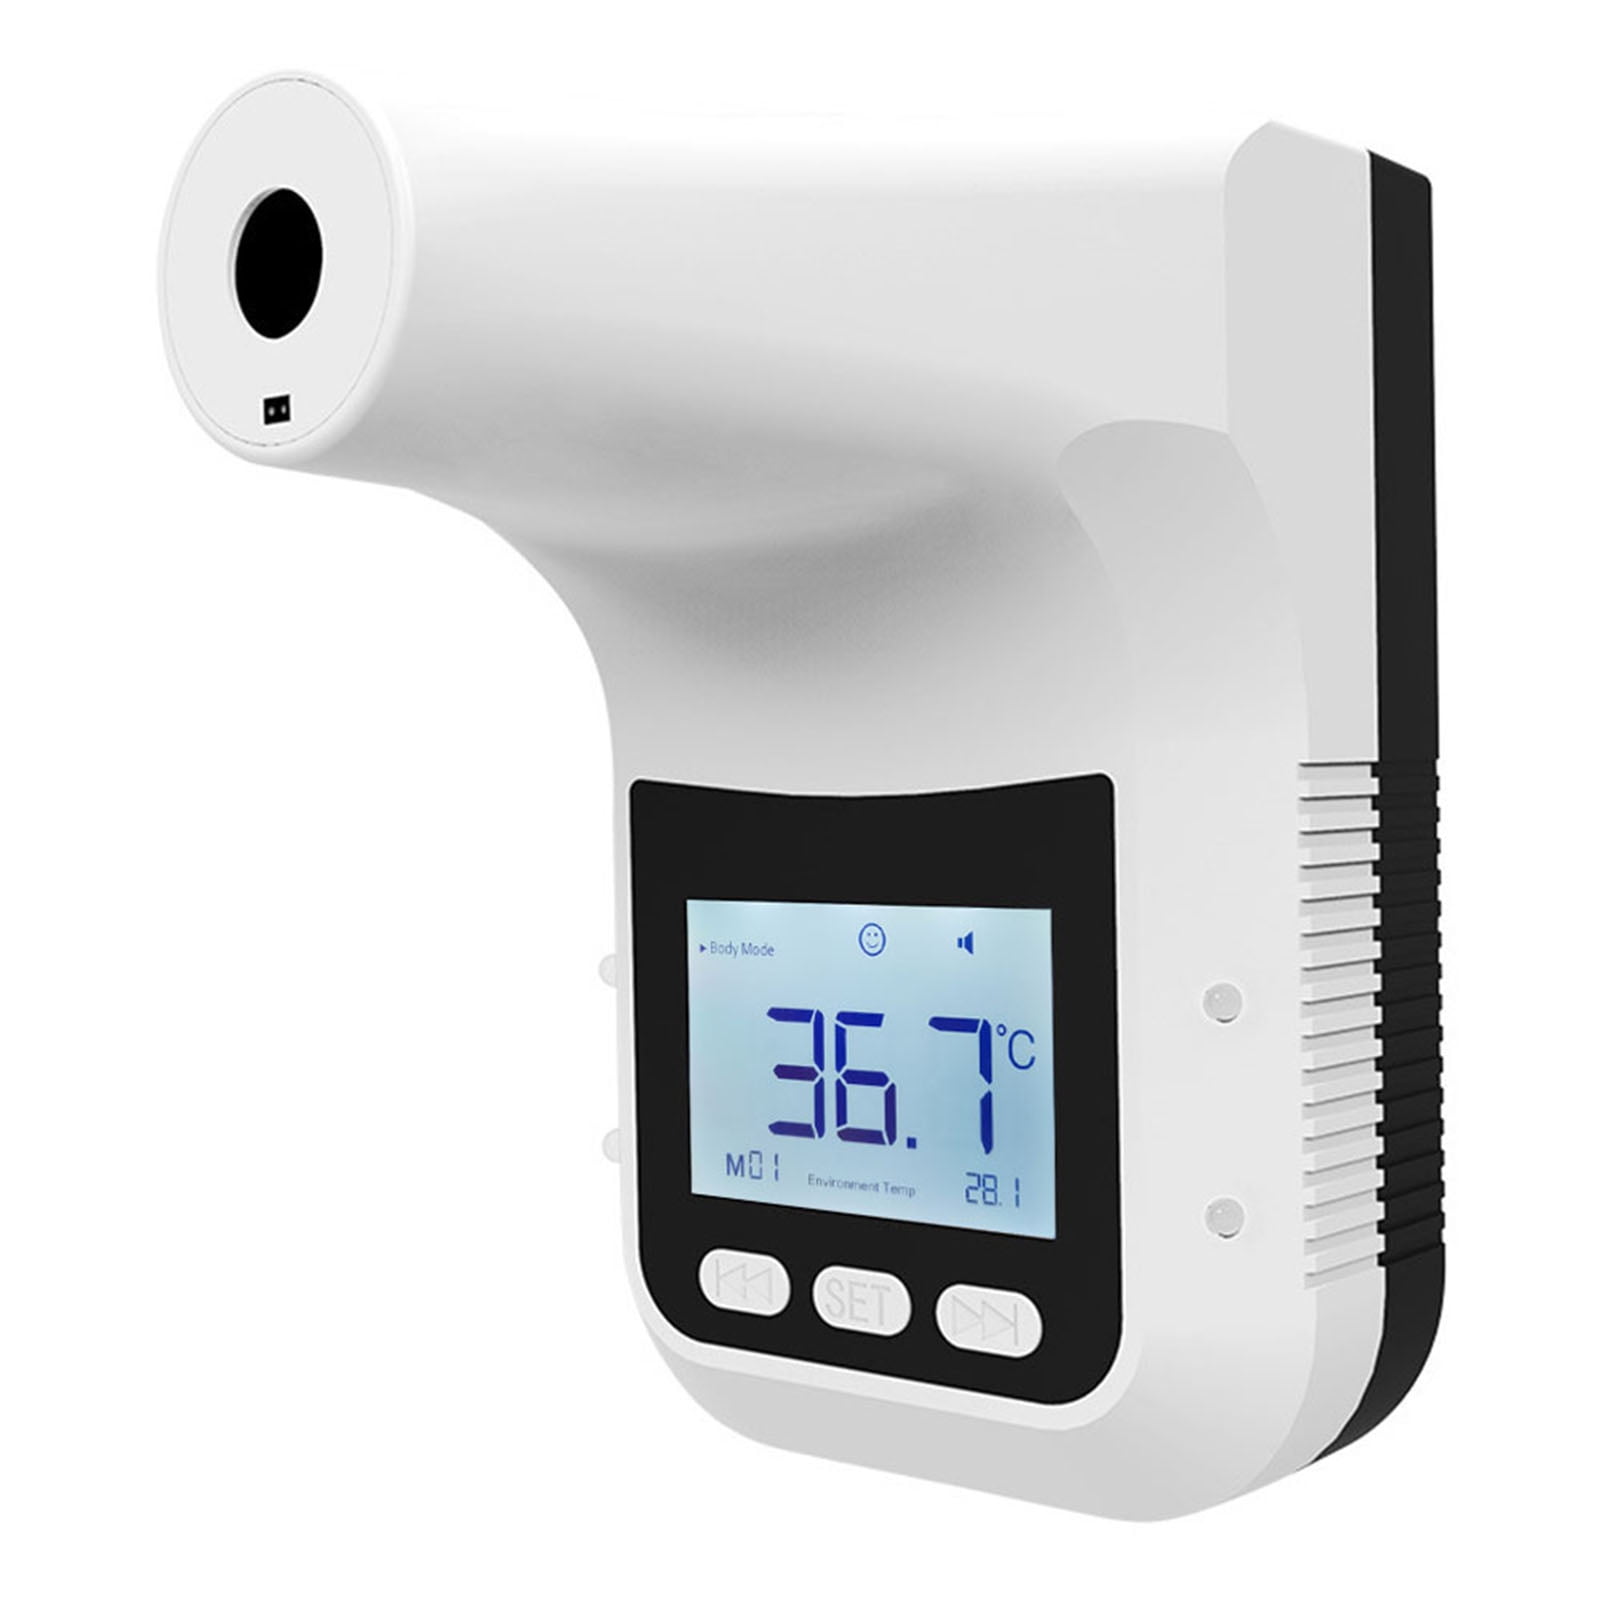 K3 Pro Sterile Thermometer Non- Automatic Infrared Thermometer